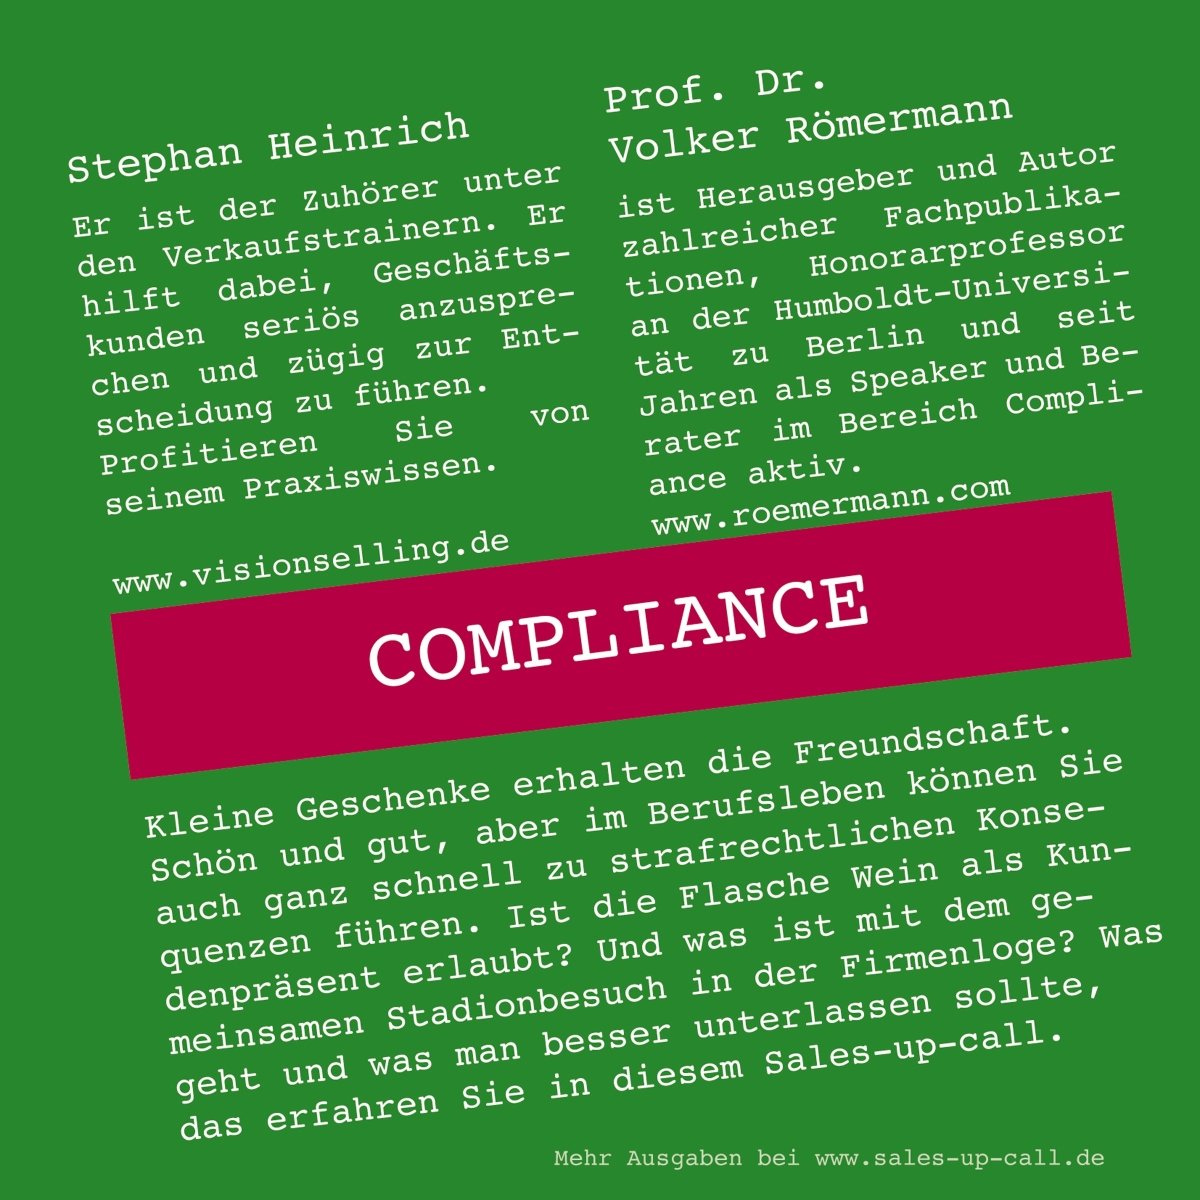 Compliance - Sales-up-Call - Stephan Heinrich